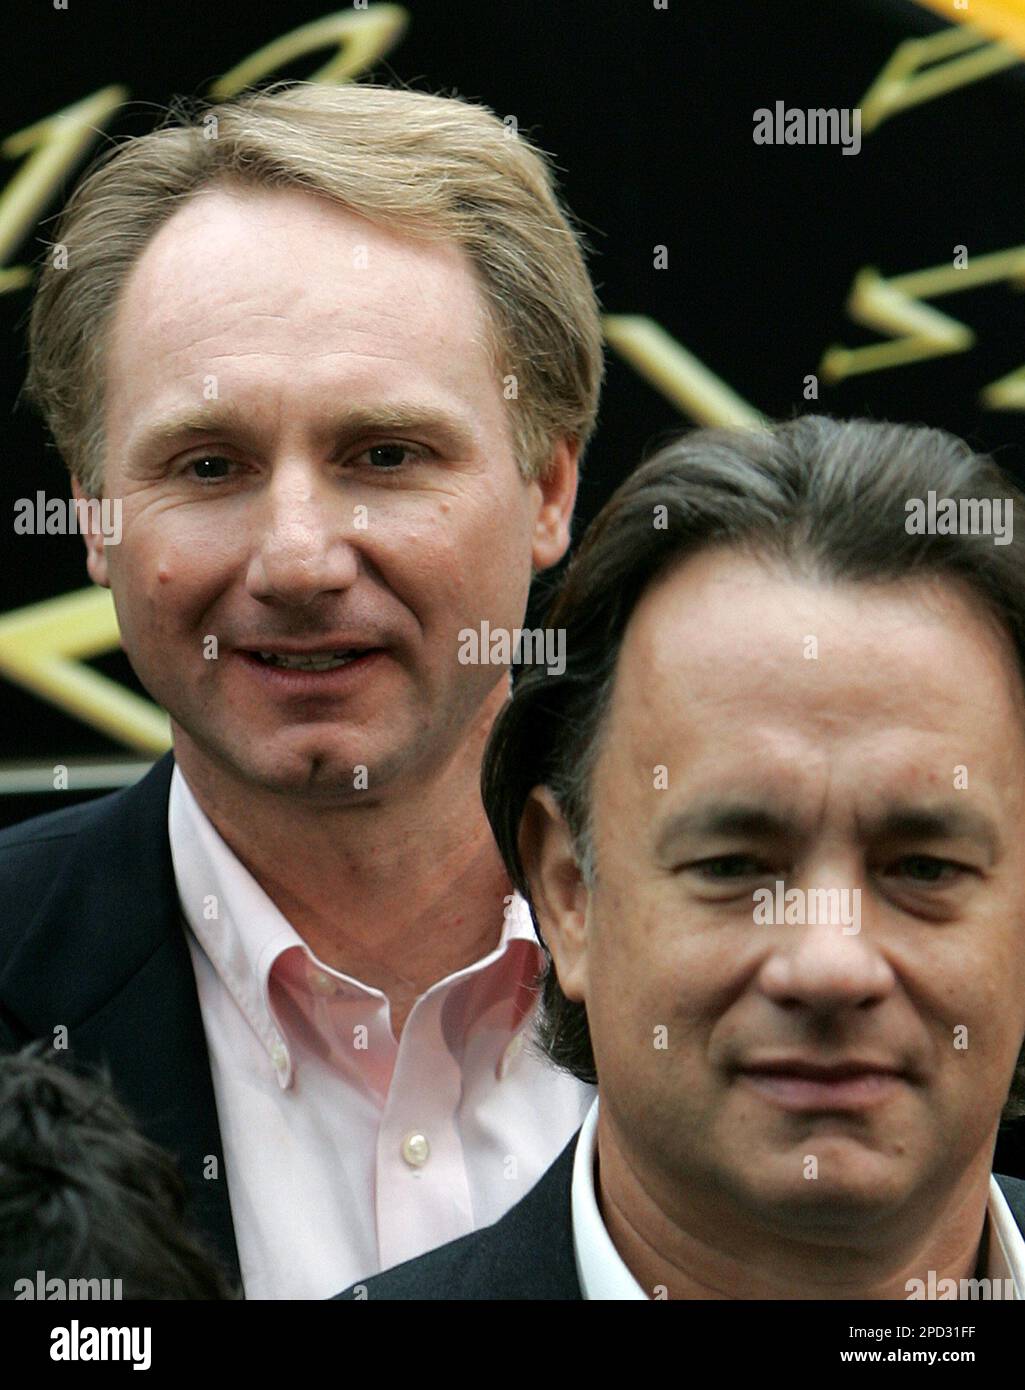 Author Dan Brown stands with U.S. actor Tom Hanks, right, following the  naming of a Eurostar train 'The Da Vinci Code' at Waterloo Station in  London, Tuesday May 16, 2006. Tom Hanks